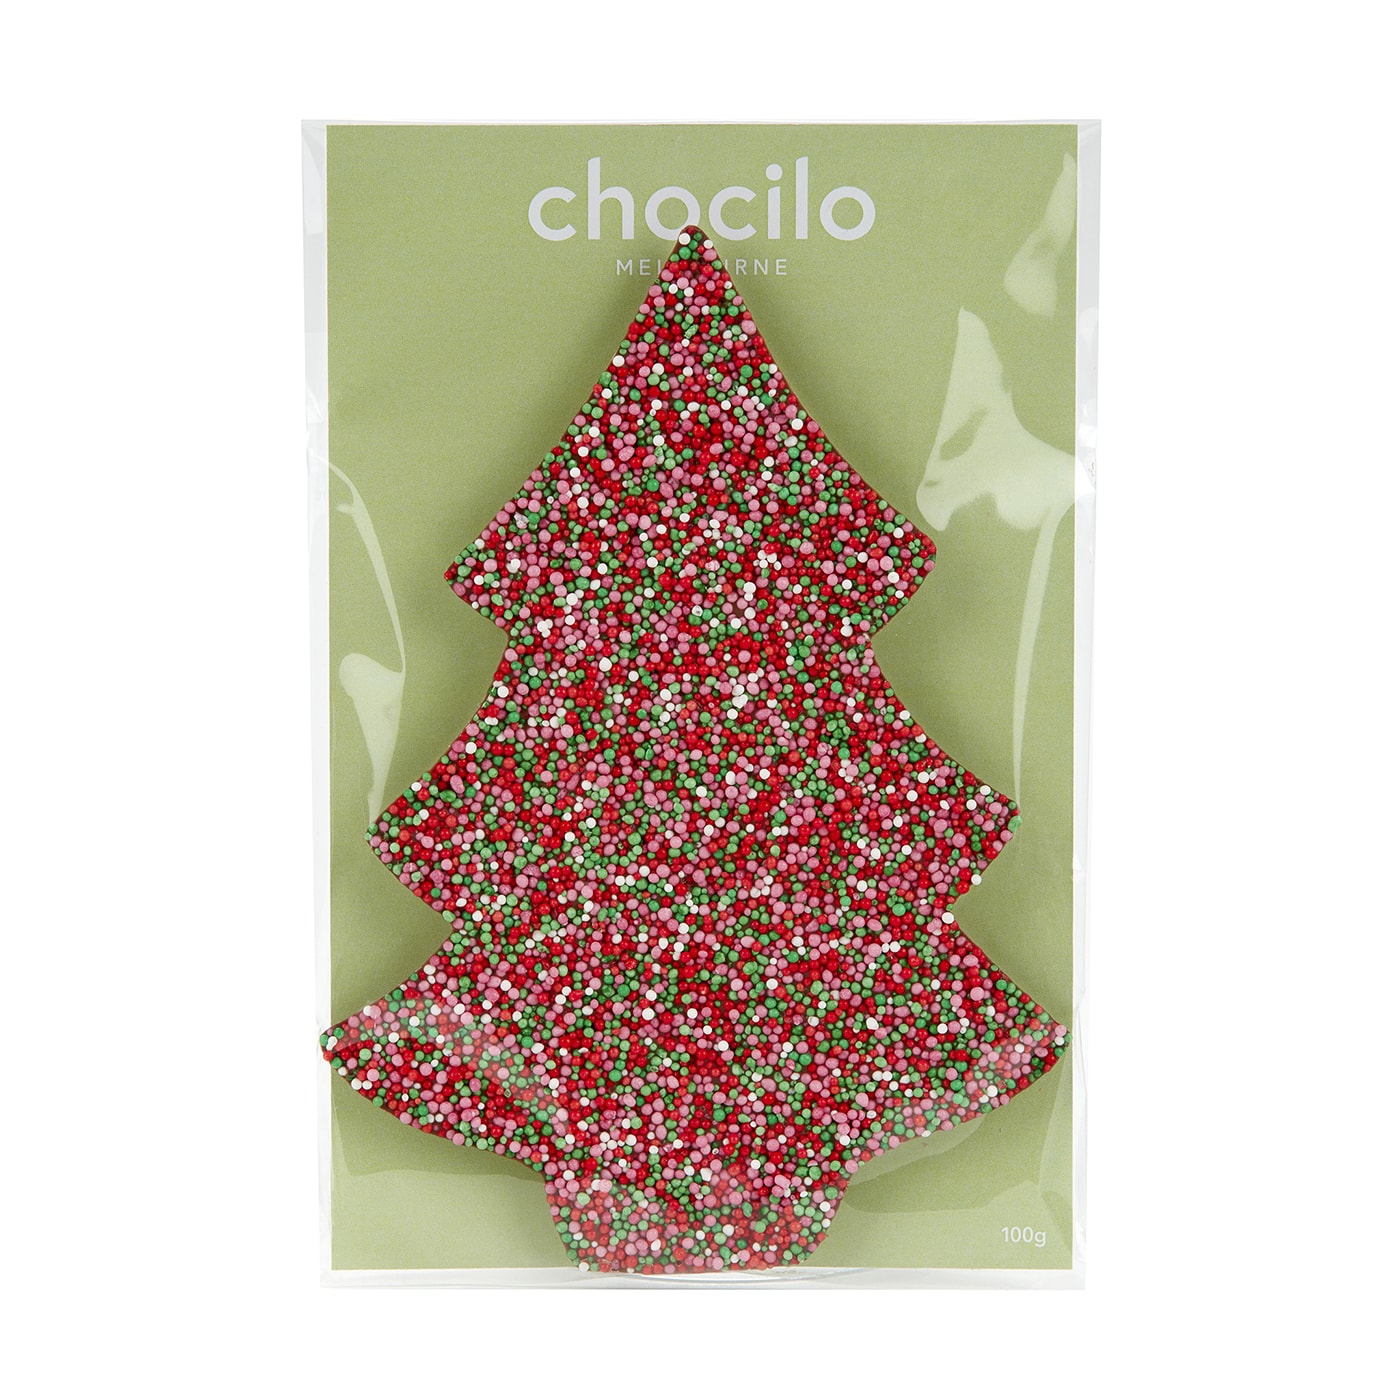 Chocilo Melbourne 100g Milk Chocolate Christmas Tree with 100s and 1000s. Packaged in cello bag with green backing card.